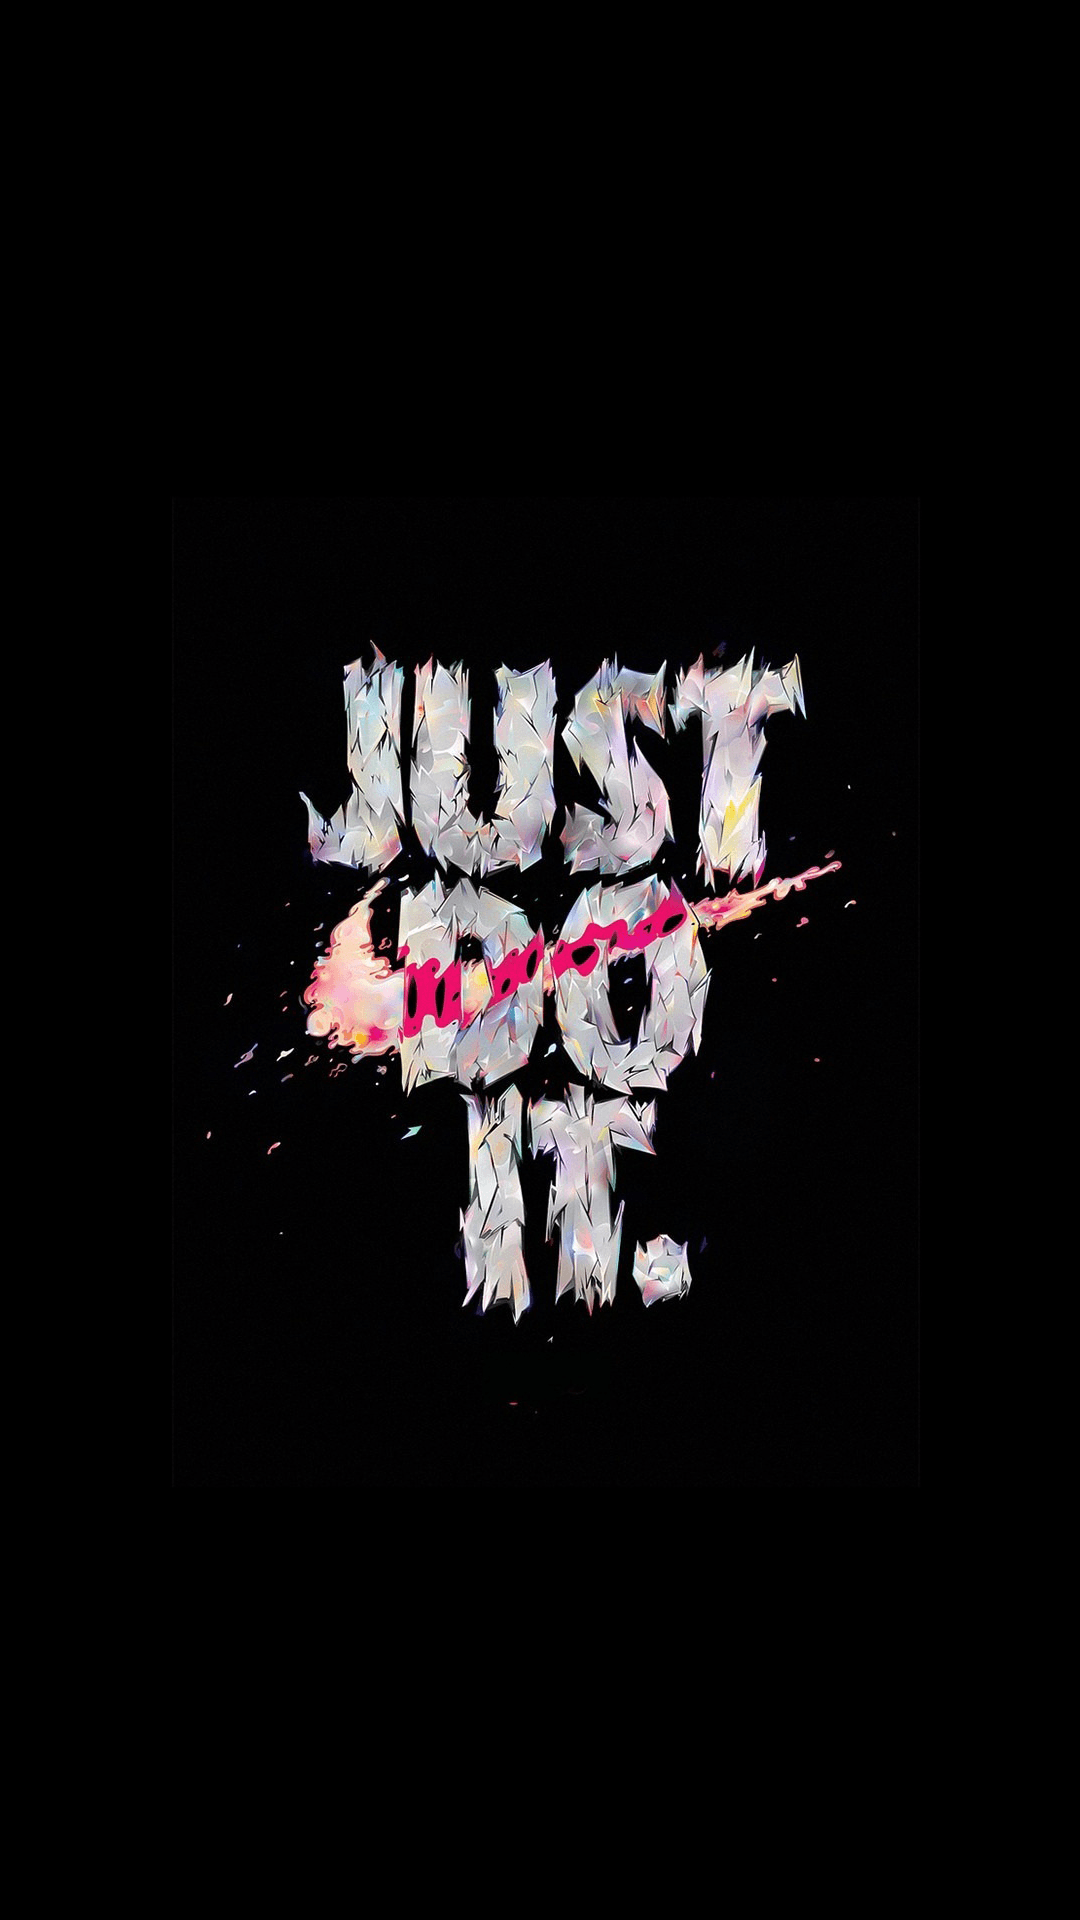 Free HD Just Do It Nike iPhone Wallpaper For Download .0147